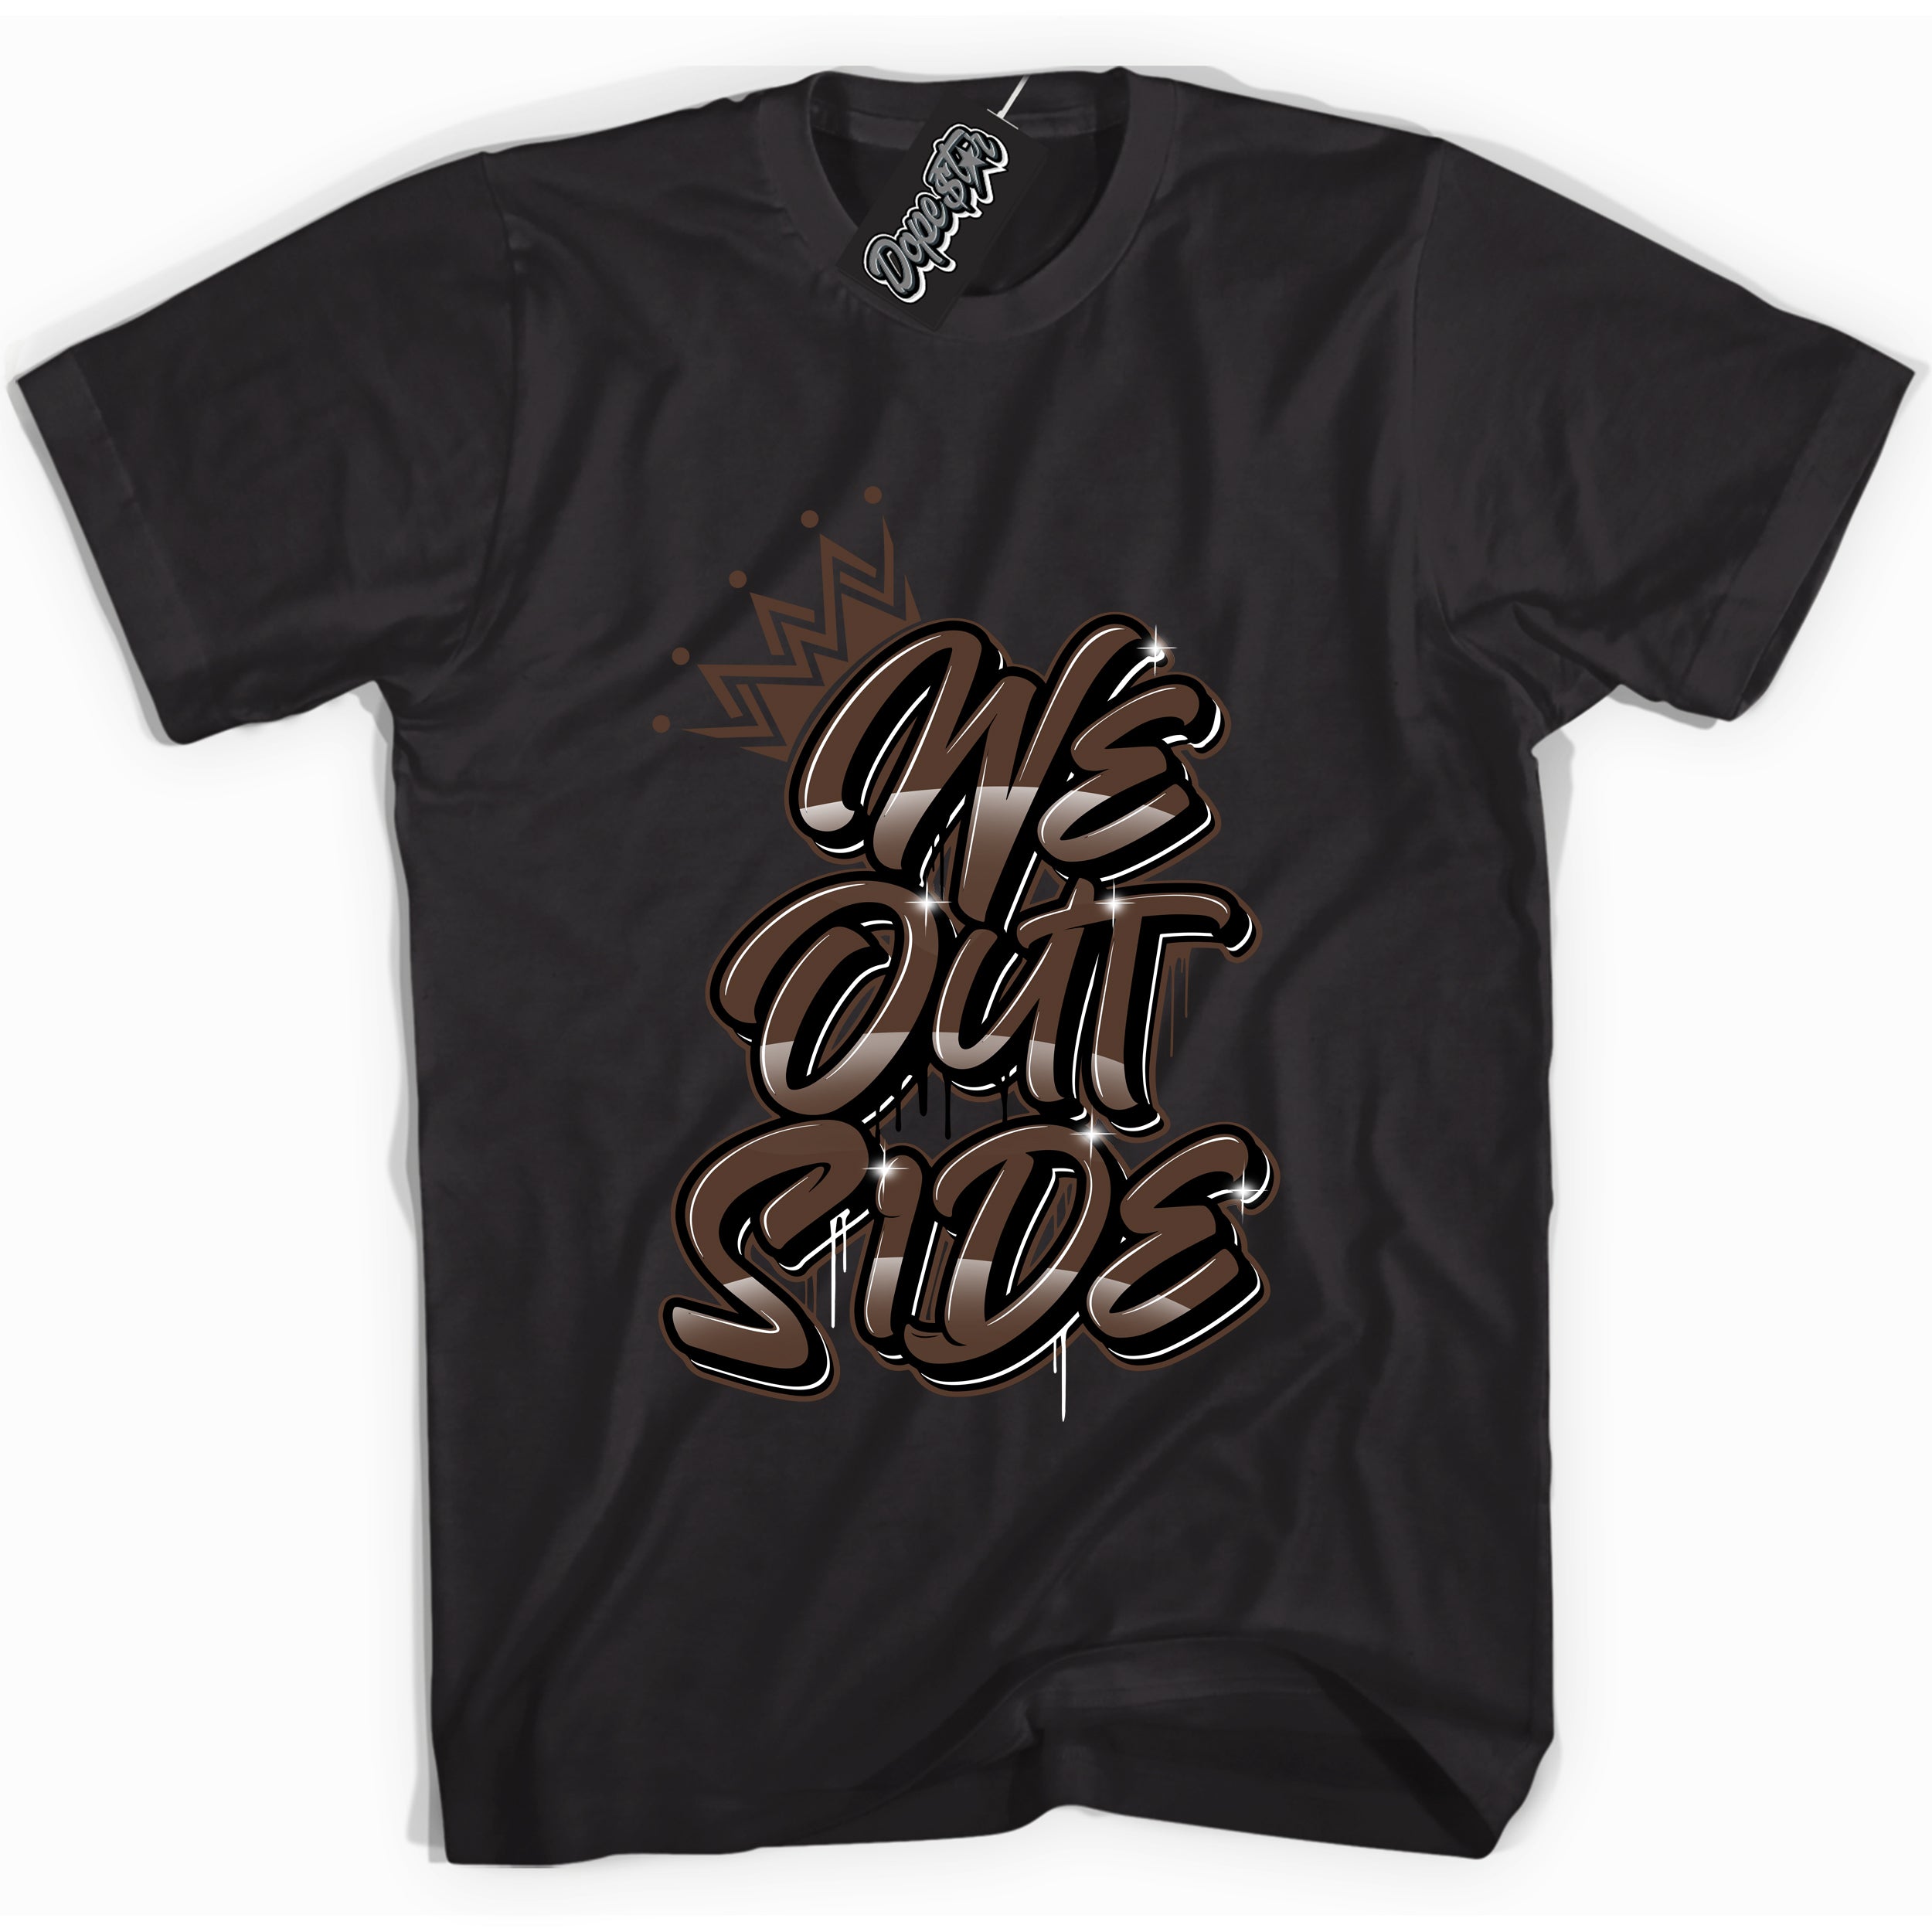 Cool Black graphic tee with “ We Outside ” design, that perfectly matches Palomino 1s sneakers 